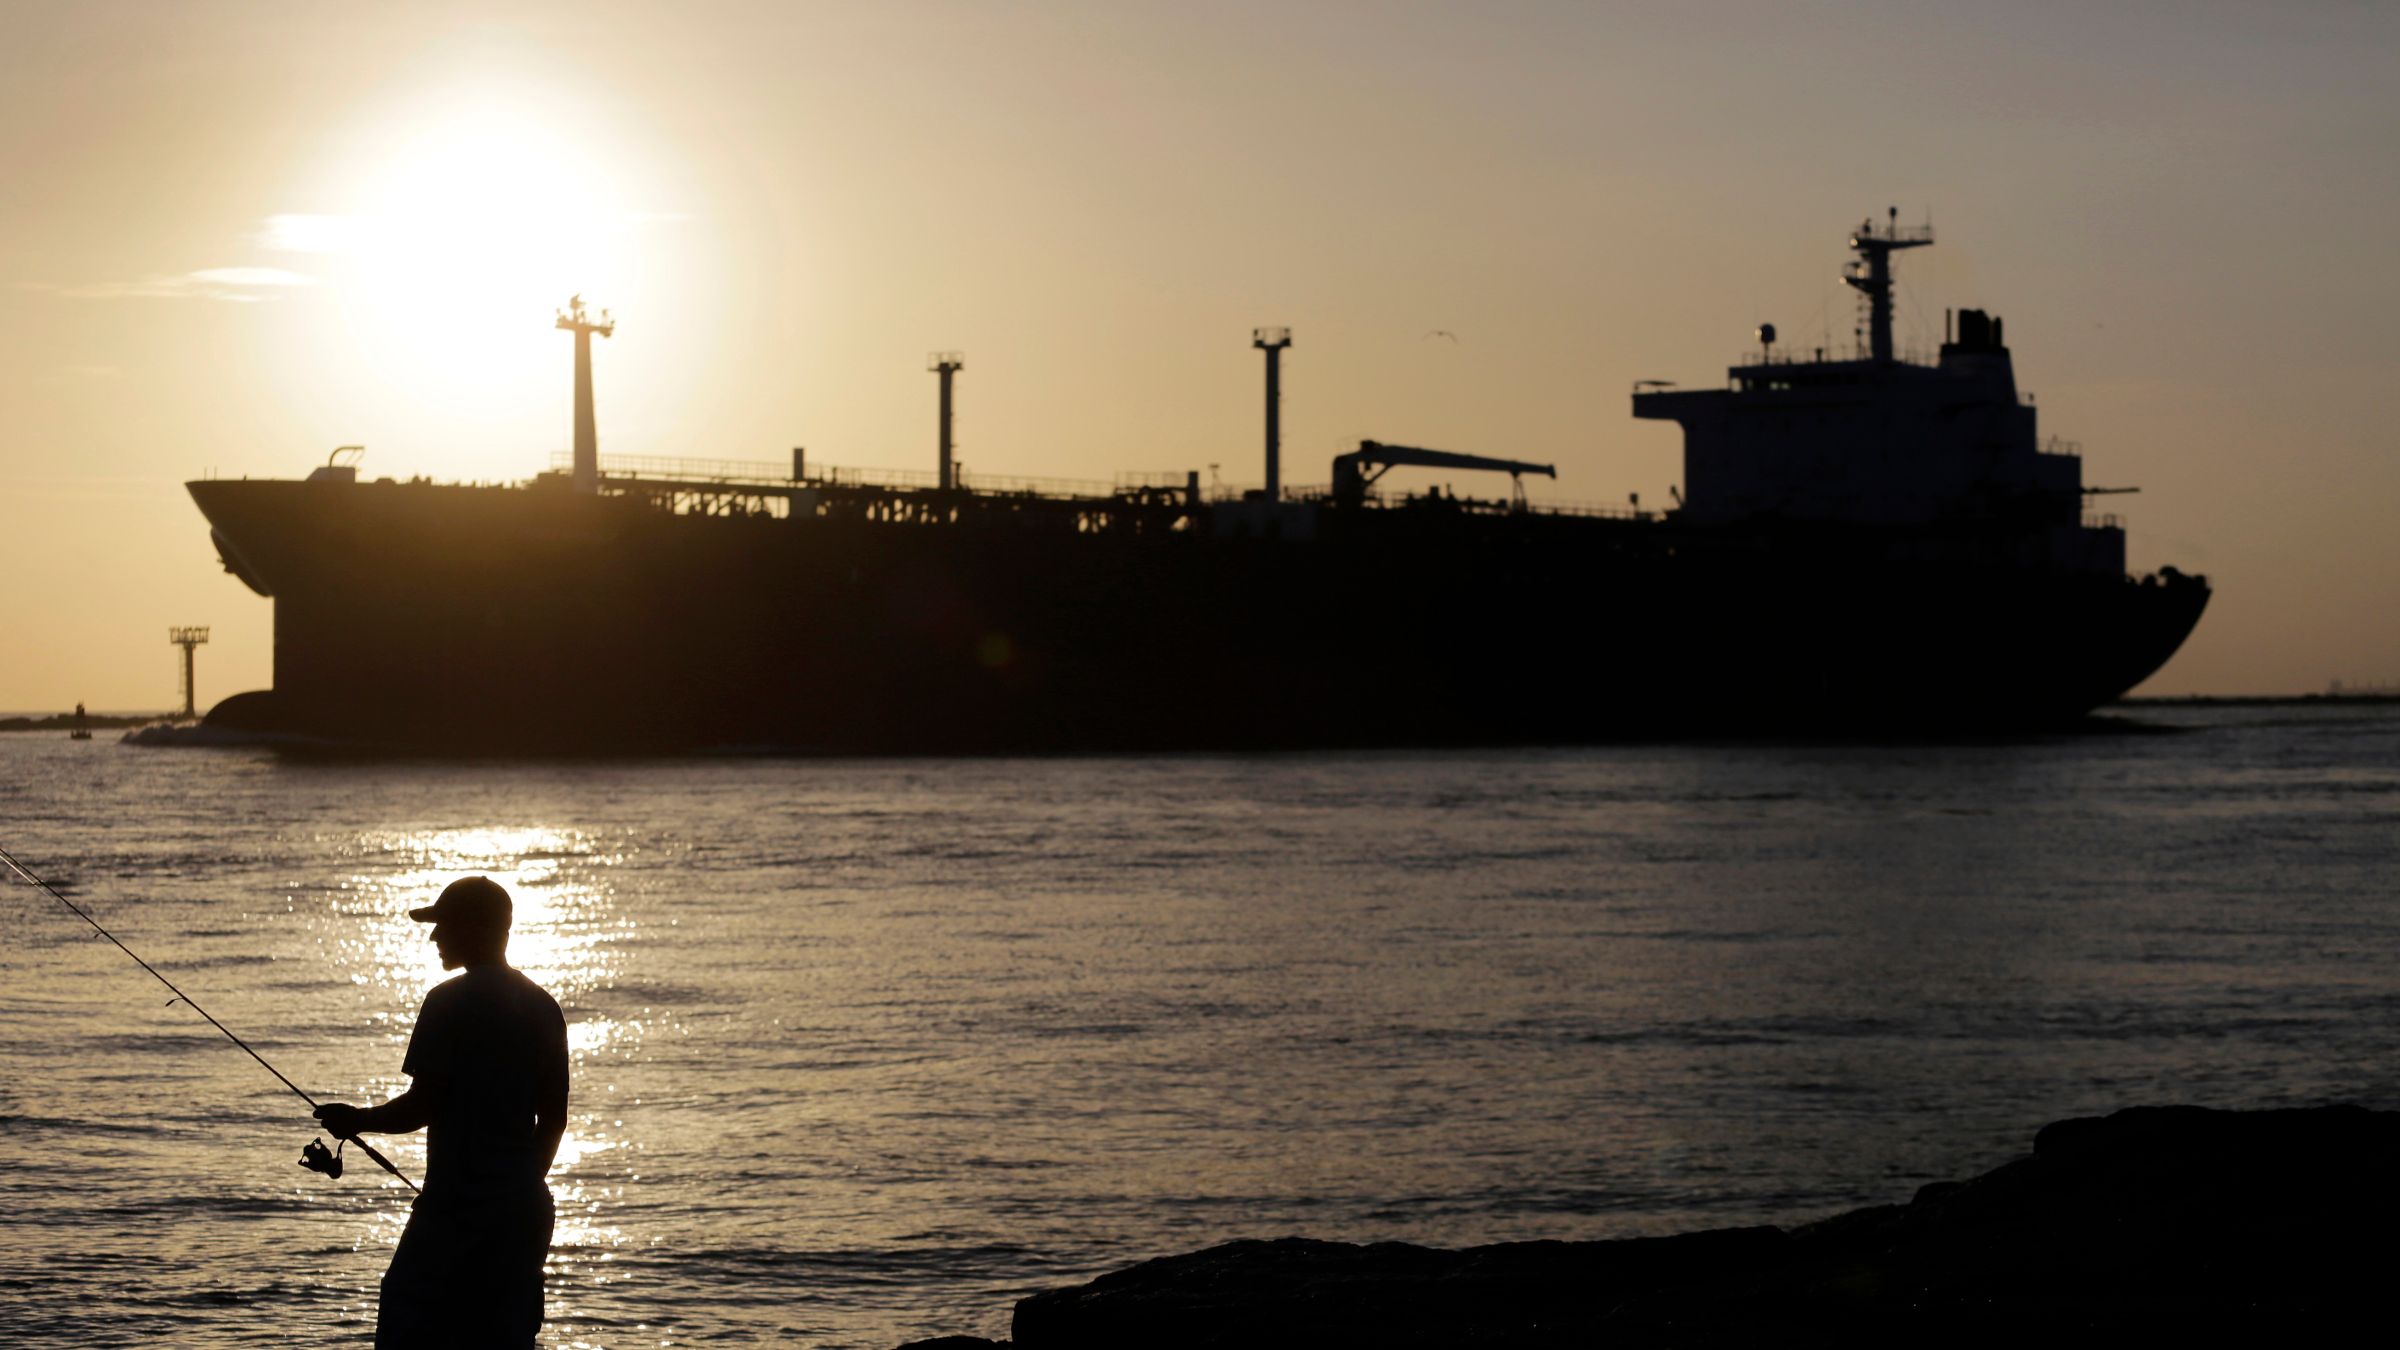 Energy & Human Rights: Saudi Oil Exports to Canada Secure Despite Political Crisis